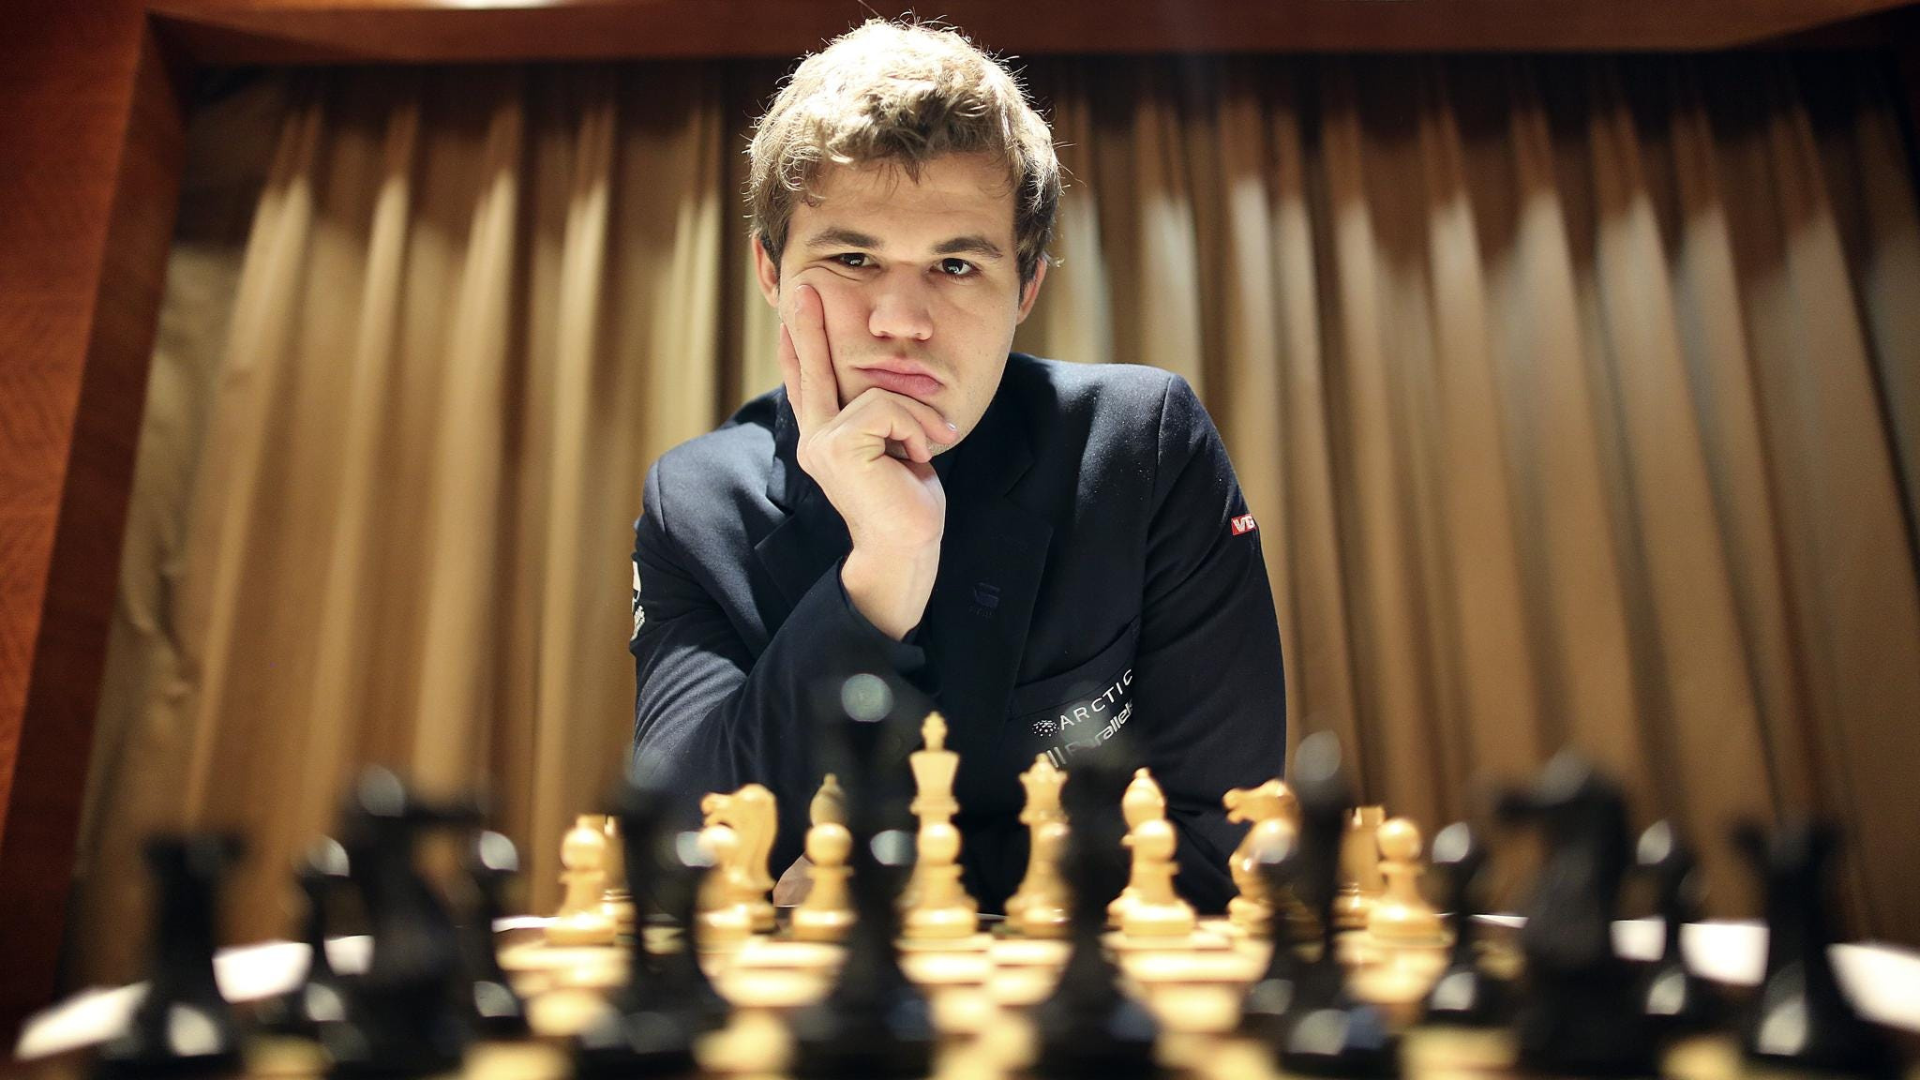 Magnus carlsen playing chess with his hand on his face